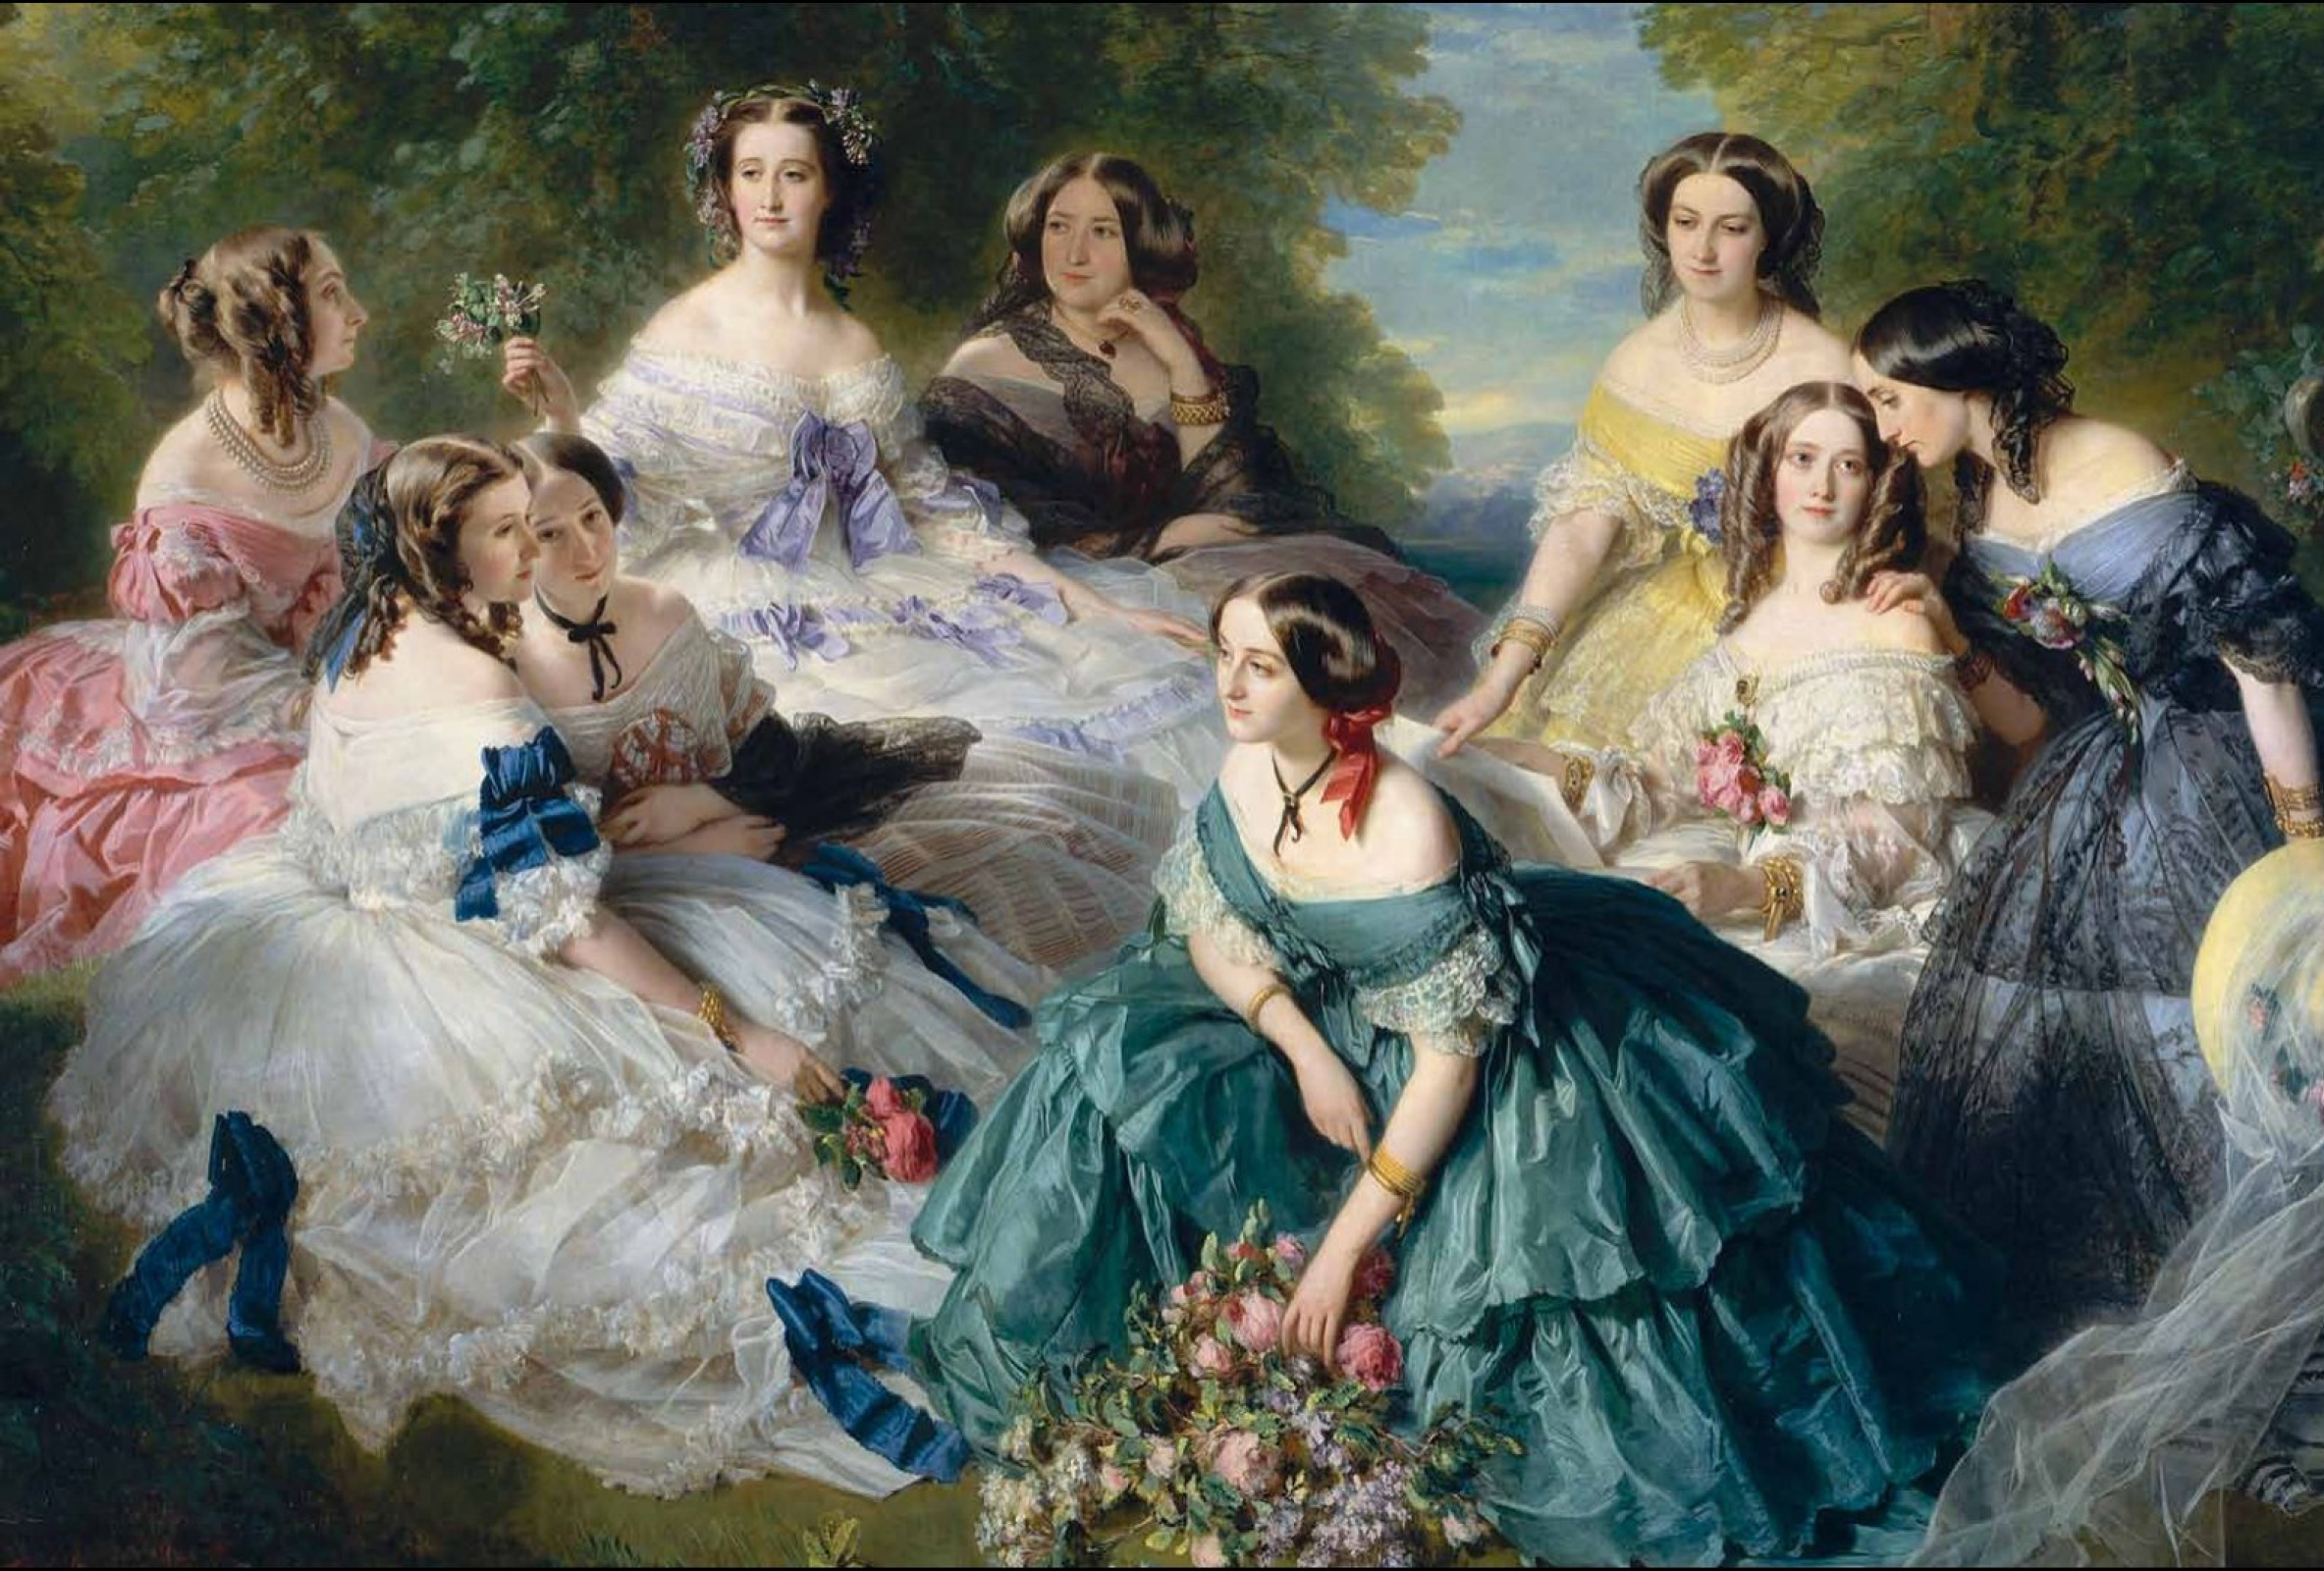 The Empress Eugenie with her ladies in waiting ( Empress eugénie